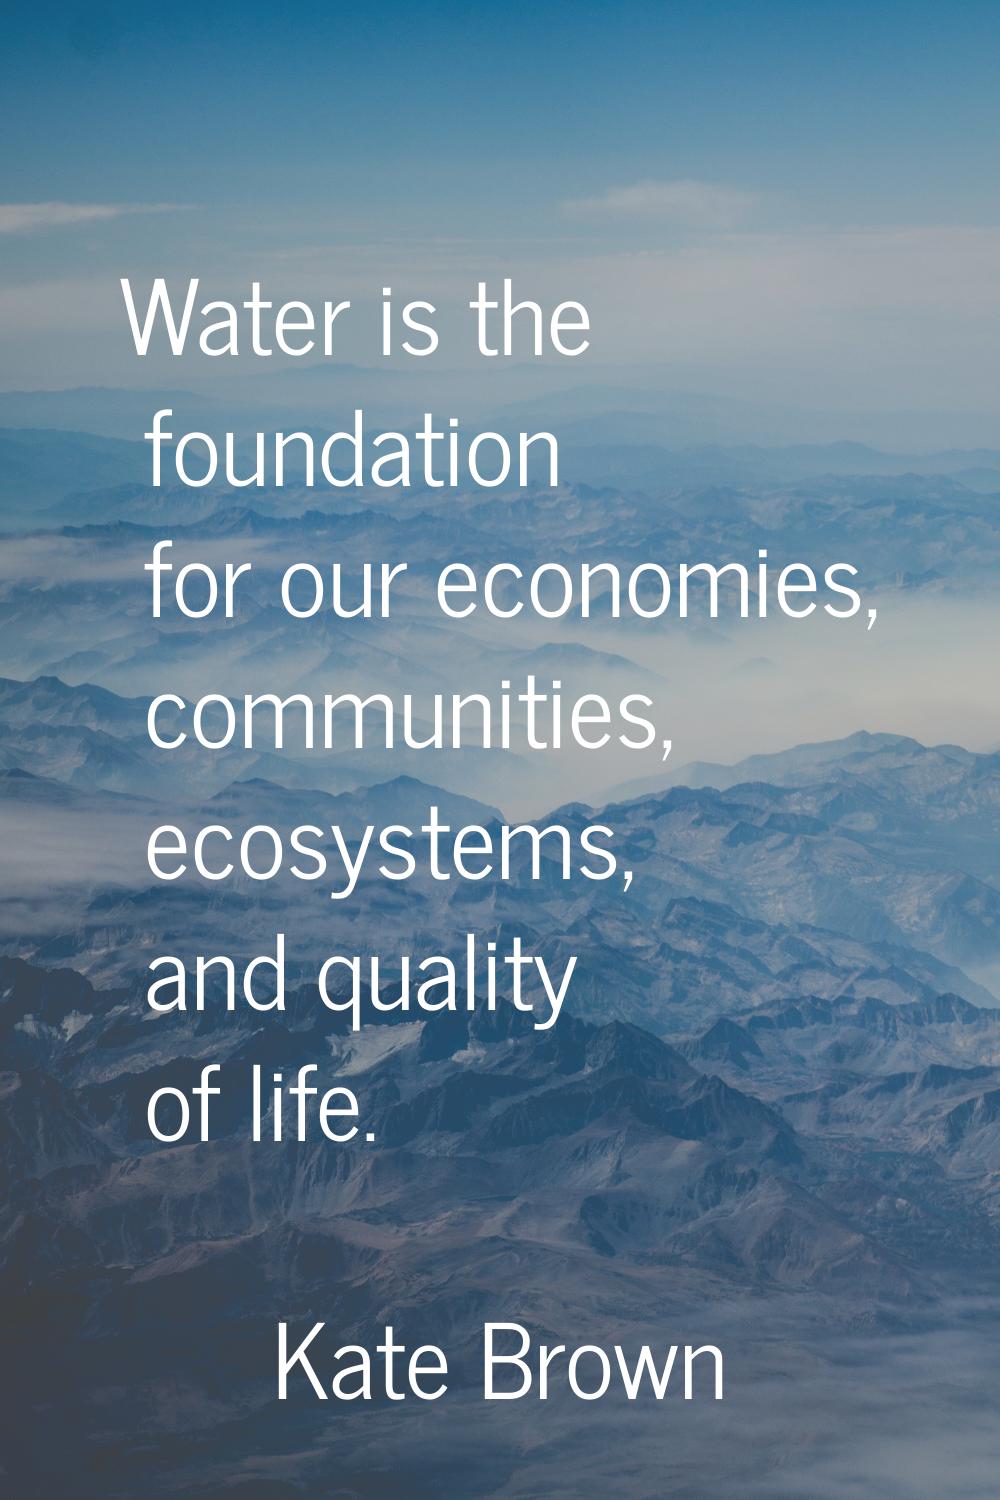 Water is the foundation for our economies, communities, ecosystems, and quality of life.